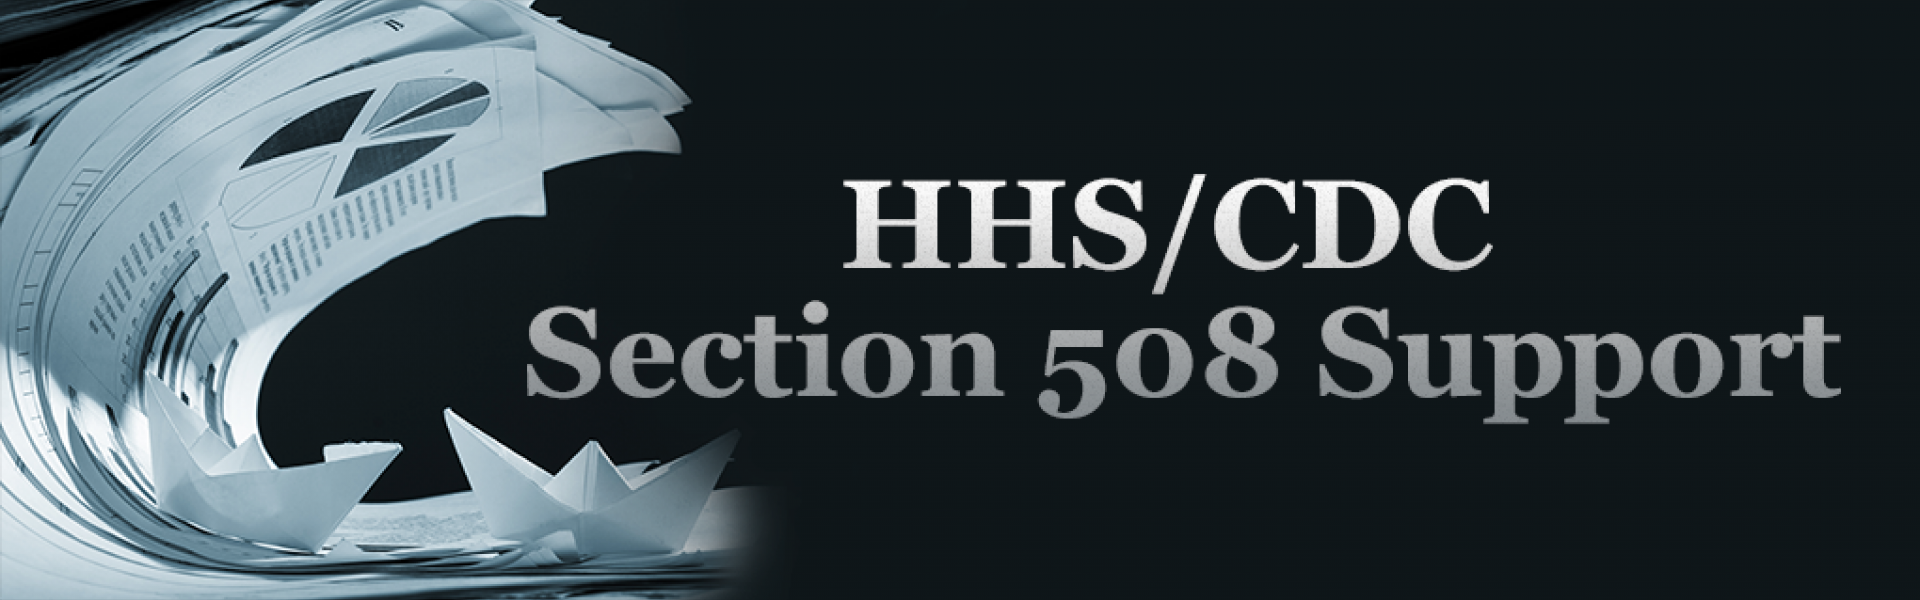 HHS CDC Section 508 Support